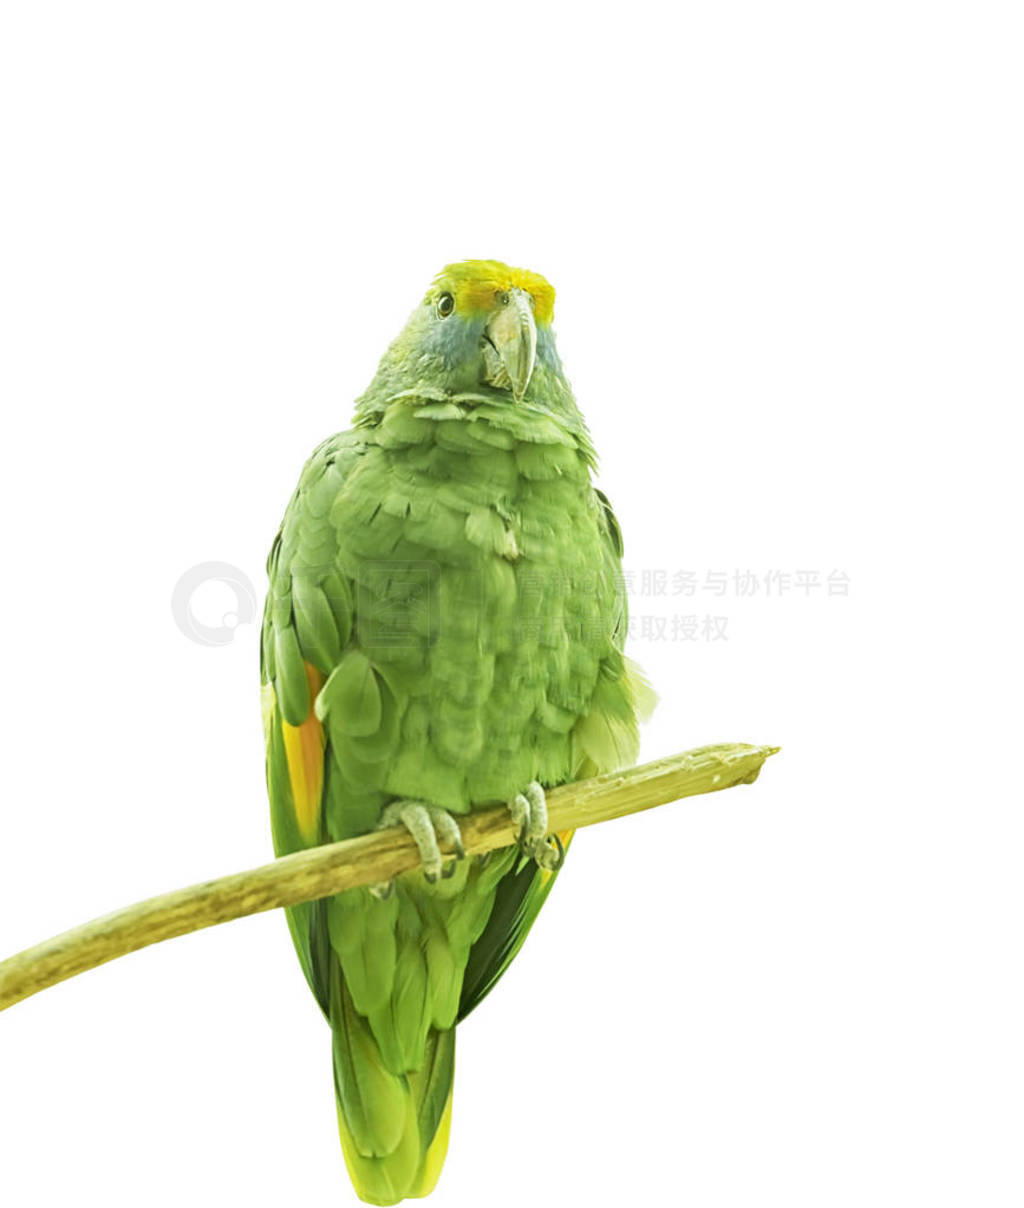 s amazon, a parrot native to Northern South-America. Exotic Trop